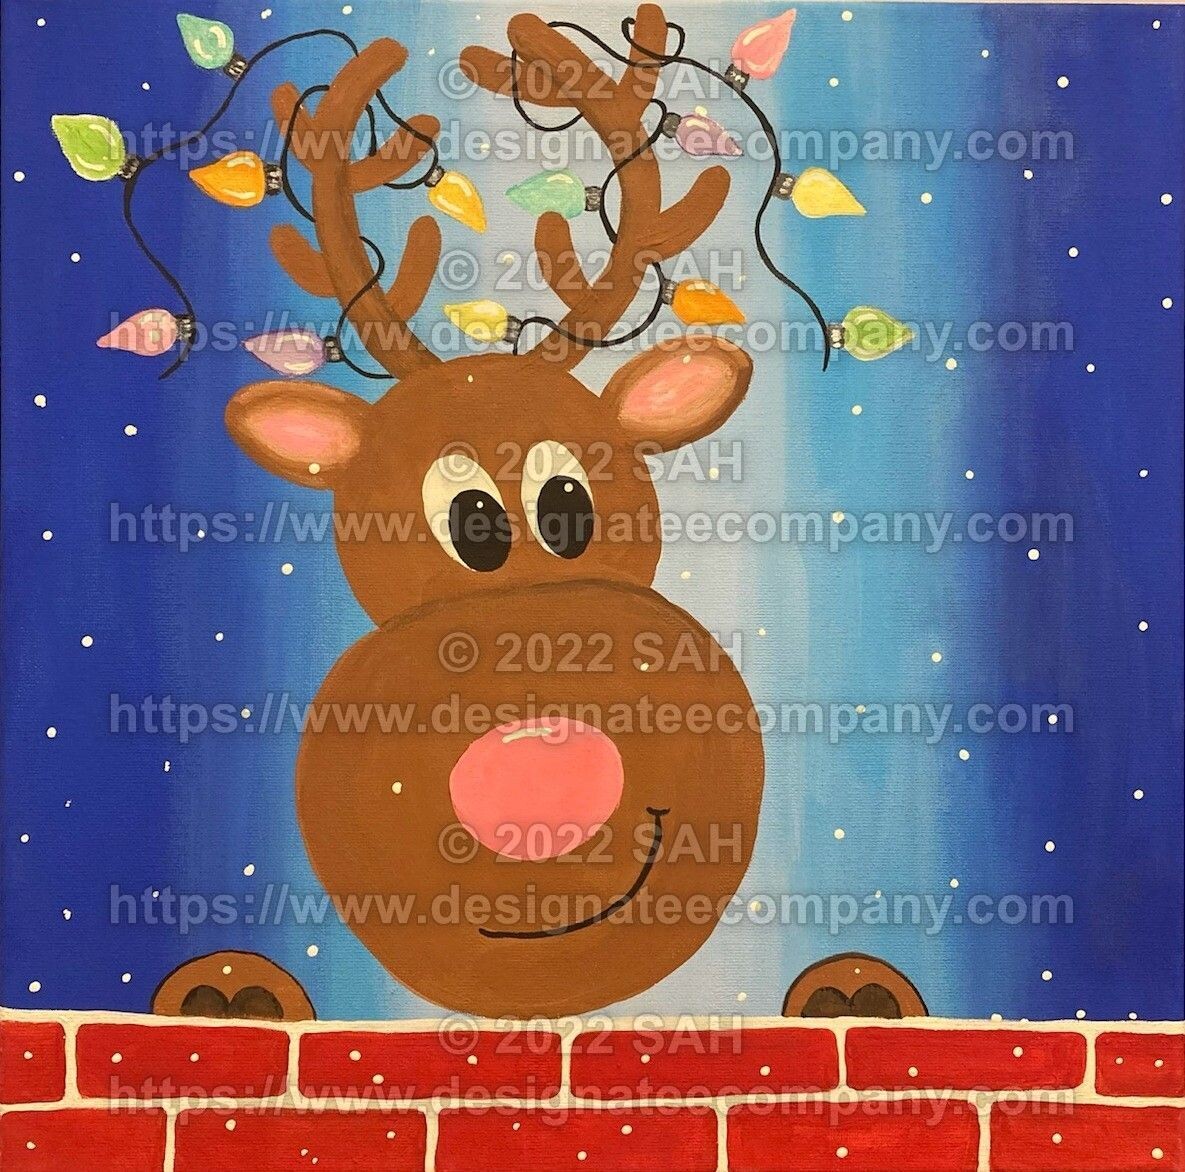 Adorable Reindeer Going Down Chimney, Acrylic Painting on Christmas Gallery Wrapped on Canvas